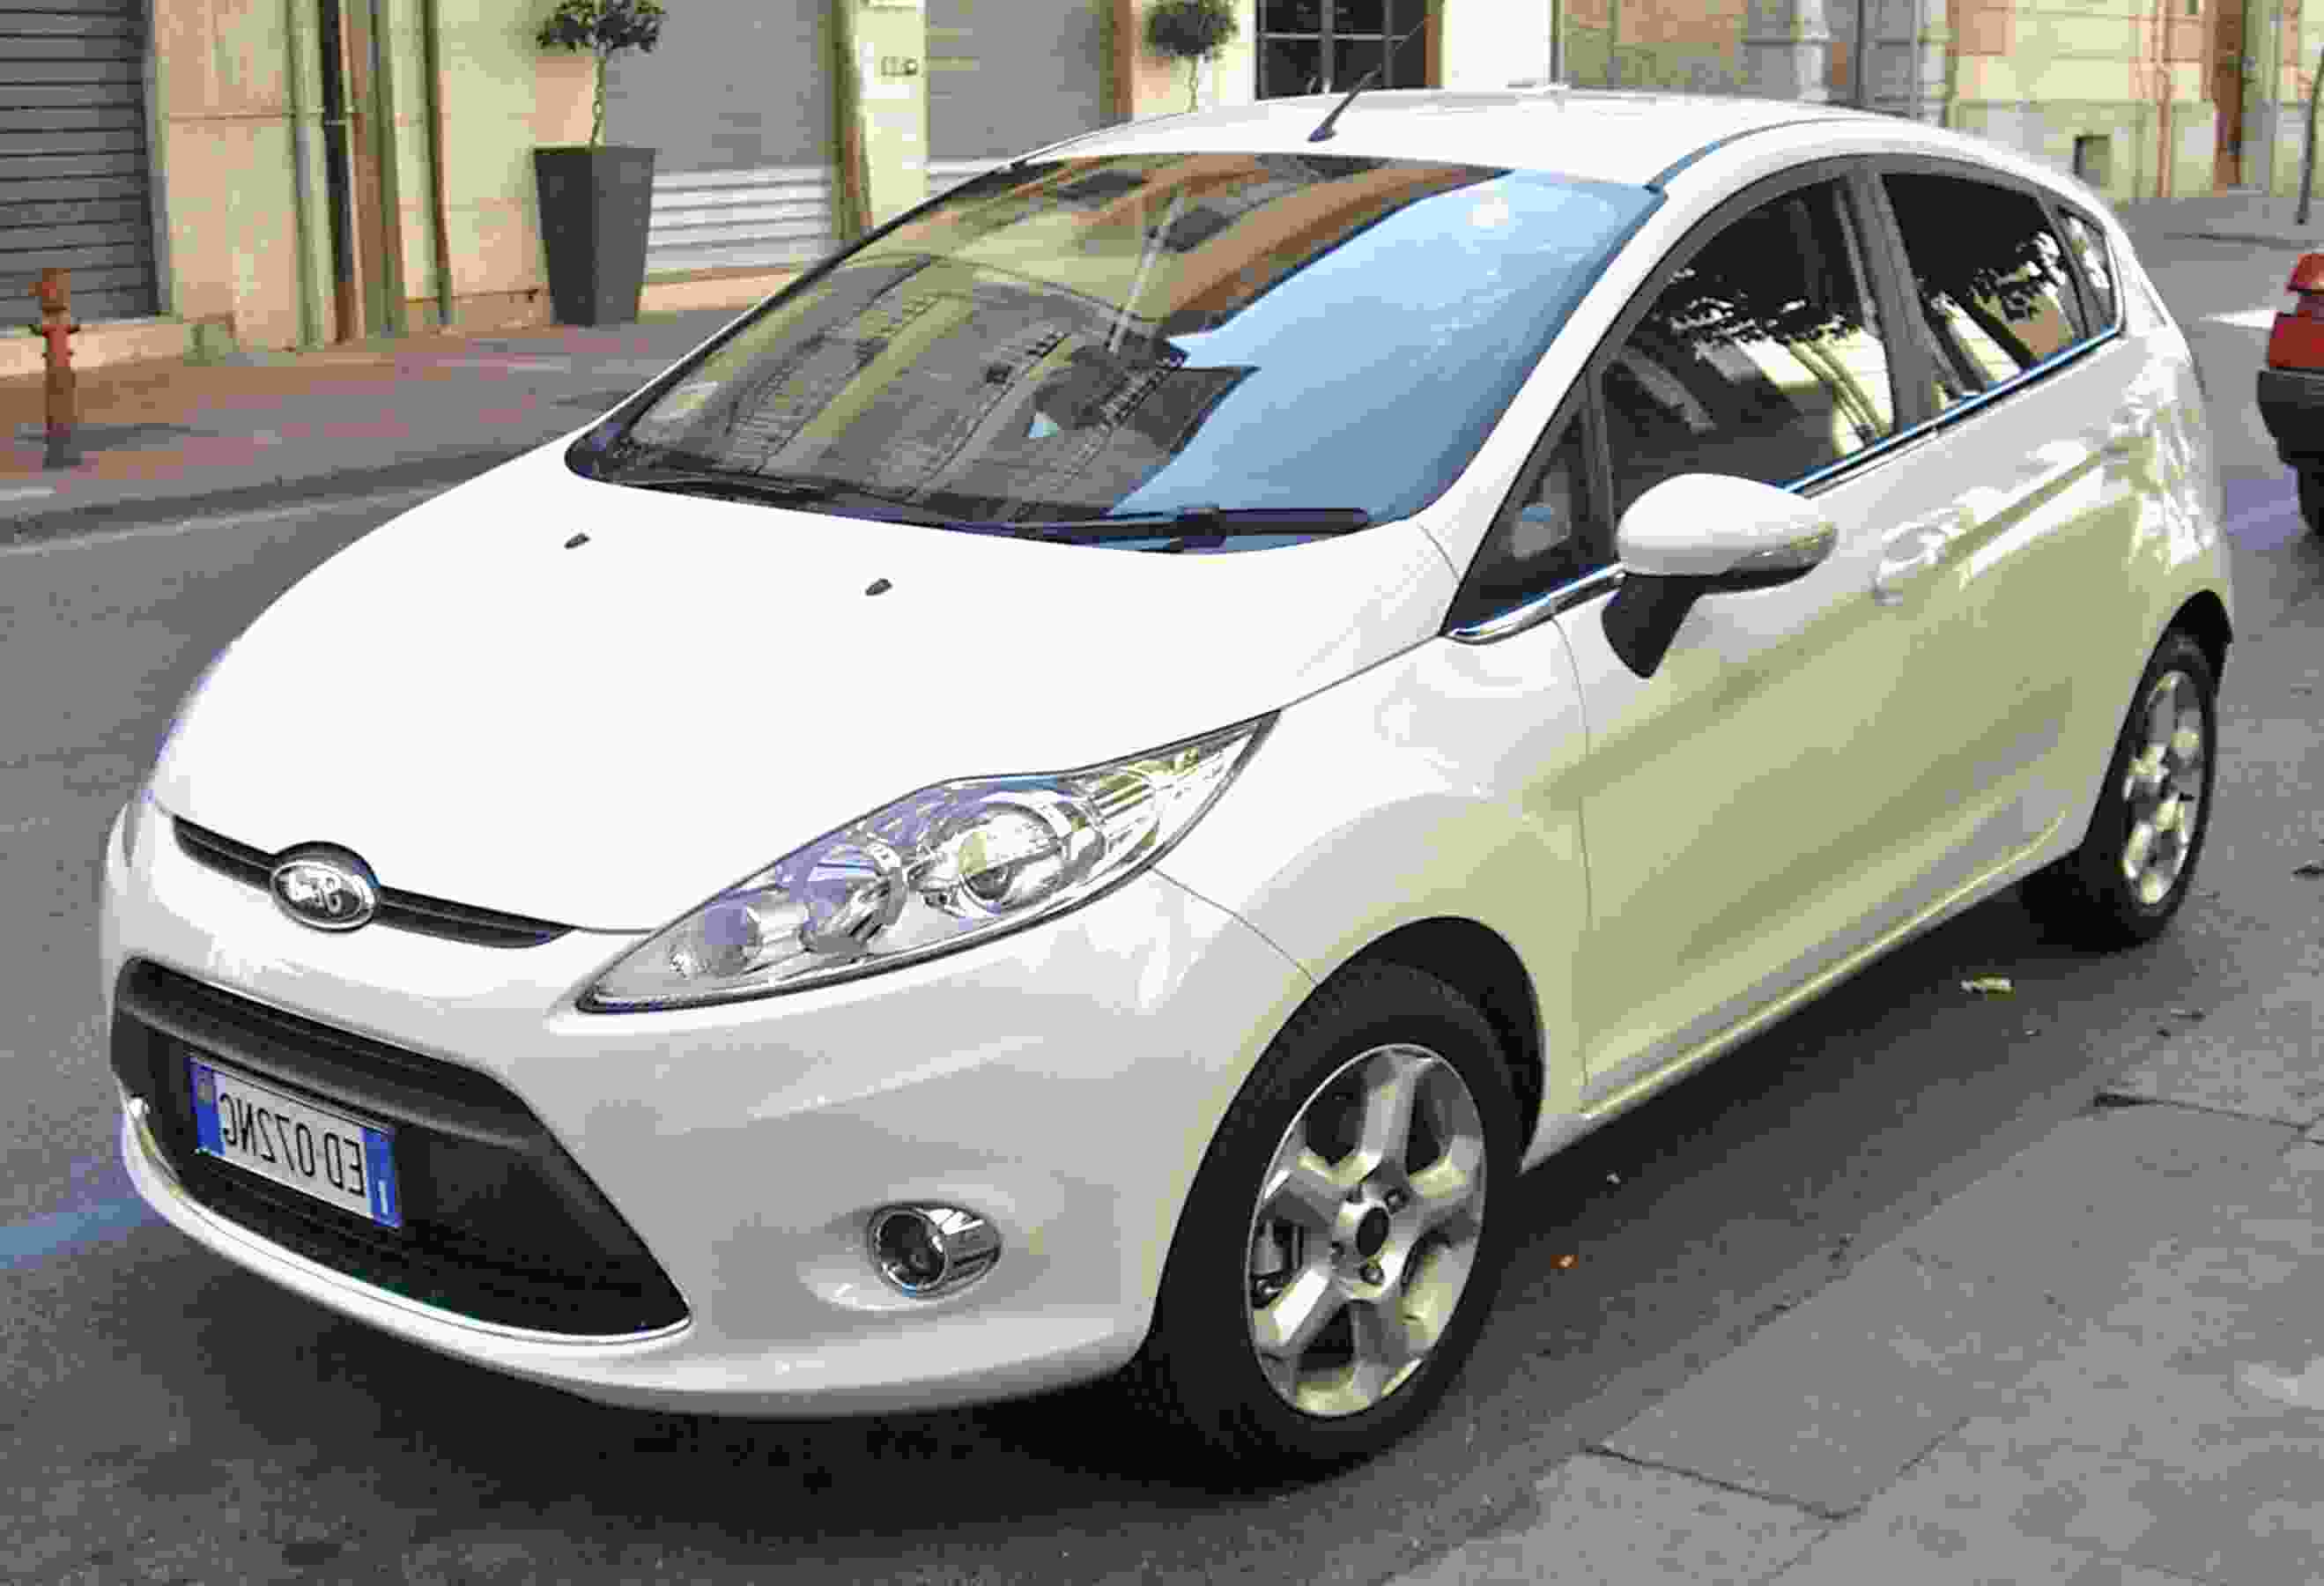 Ford Fiesta 1 4 Tdci for sale in UK View 38 bargains